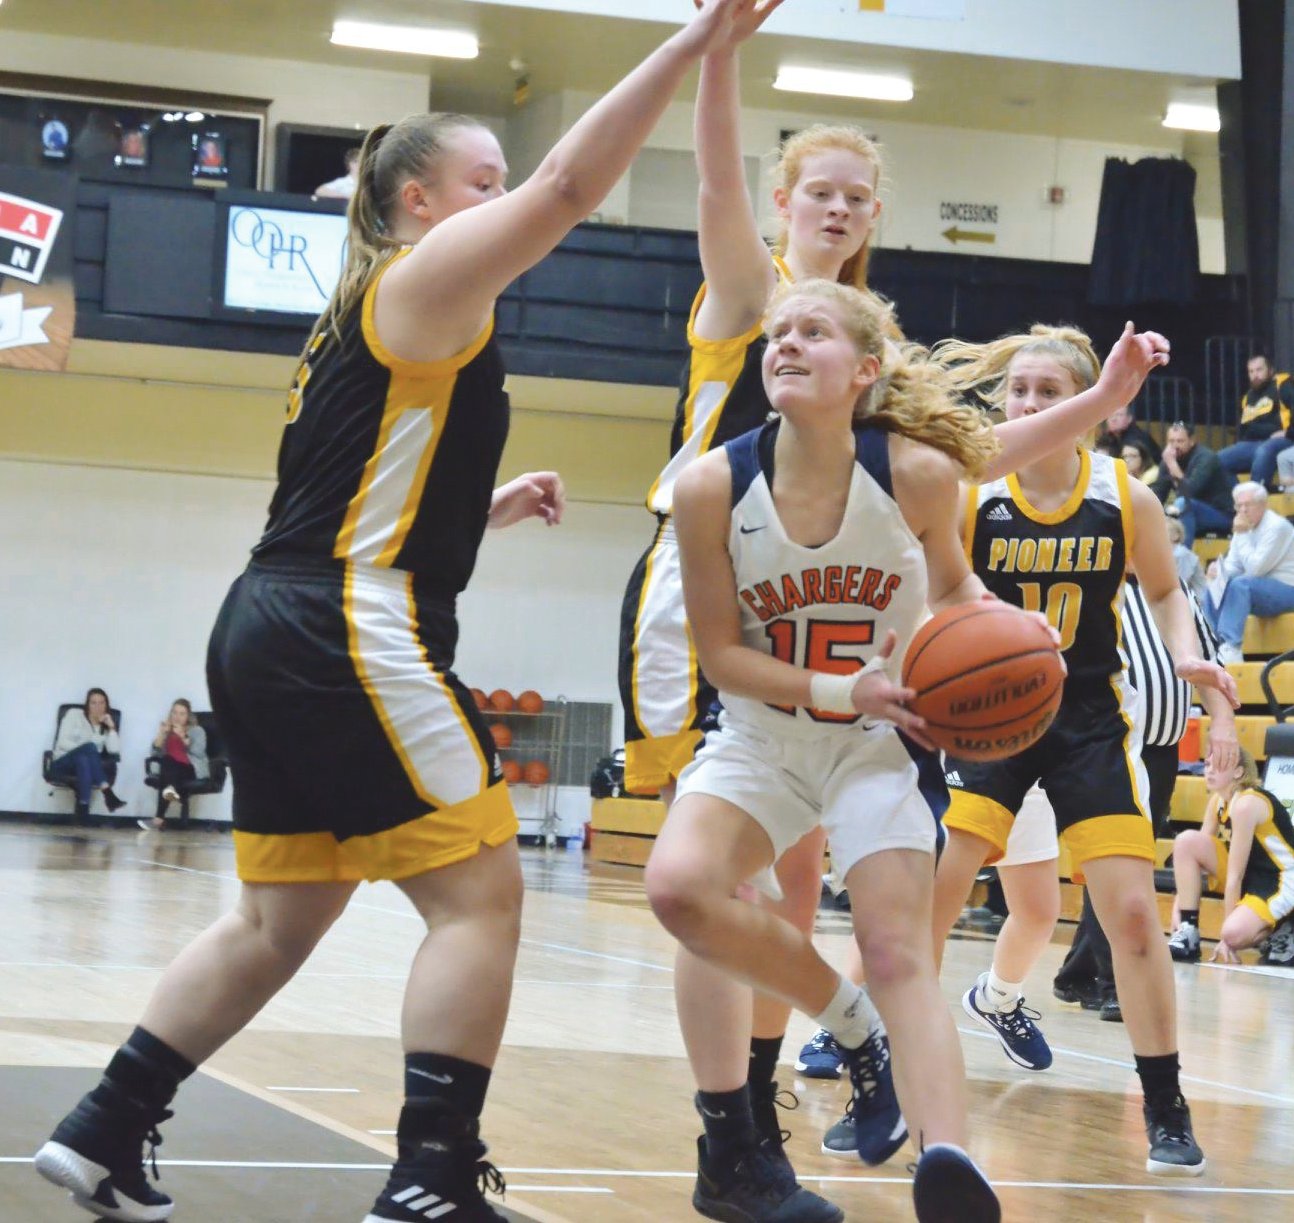 North Montgomery's Madi Welch drives in for a layup against Pioneer.